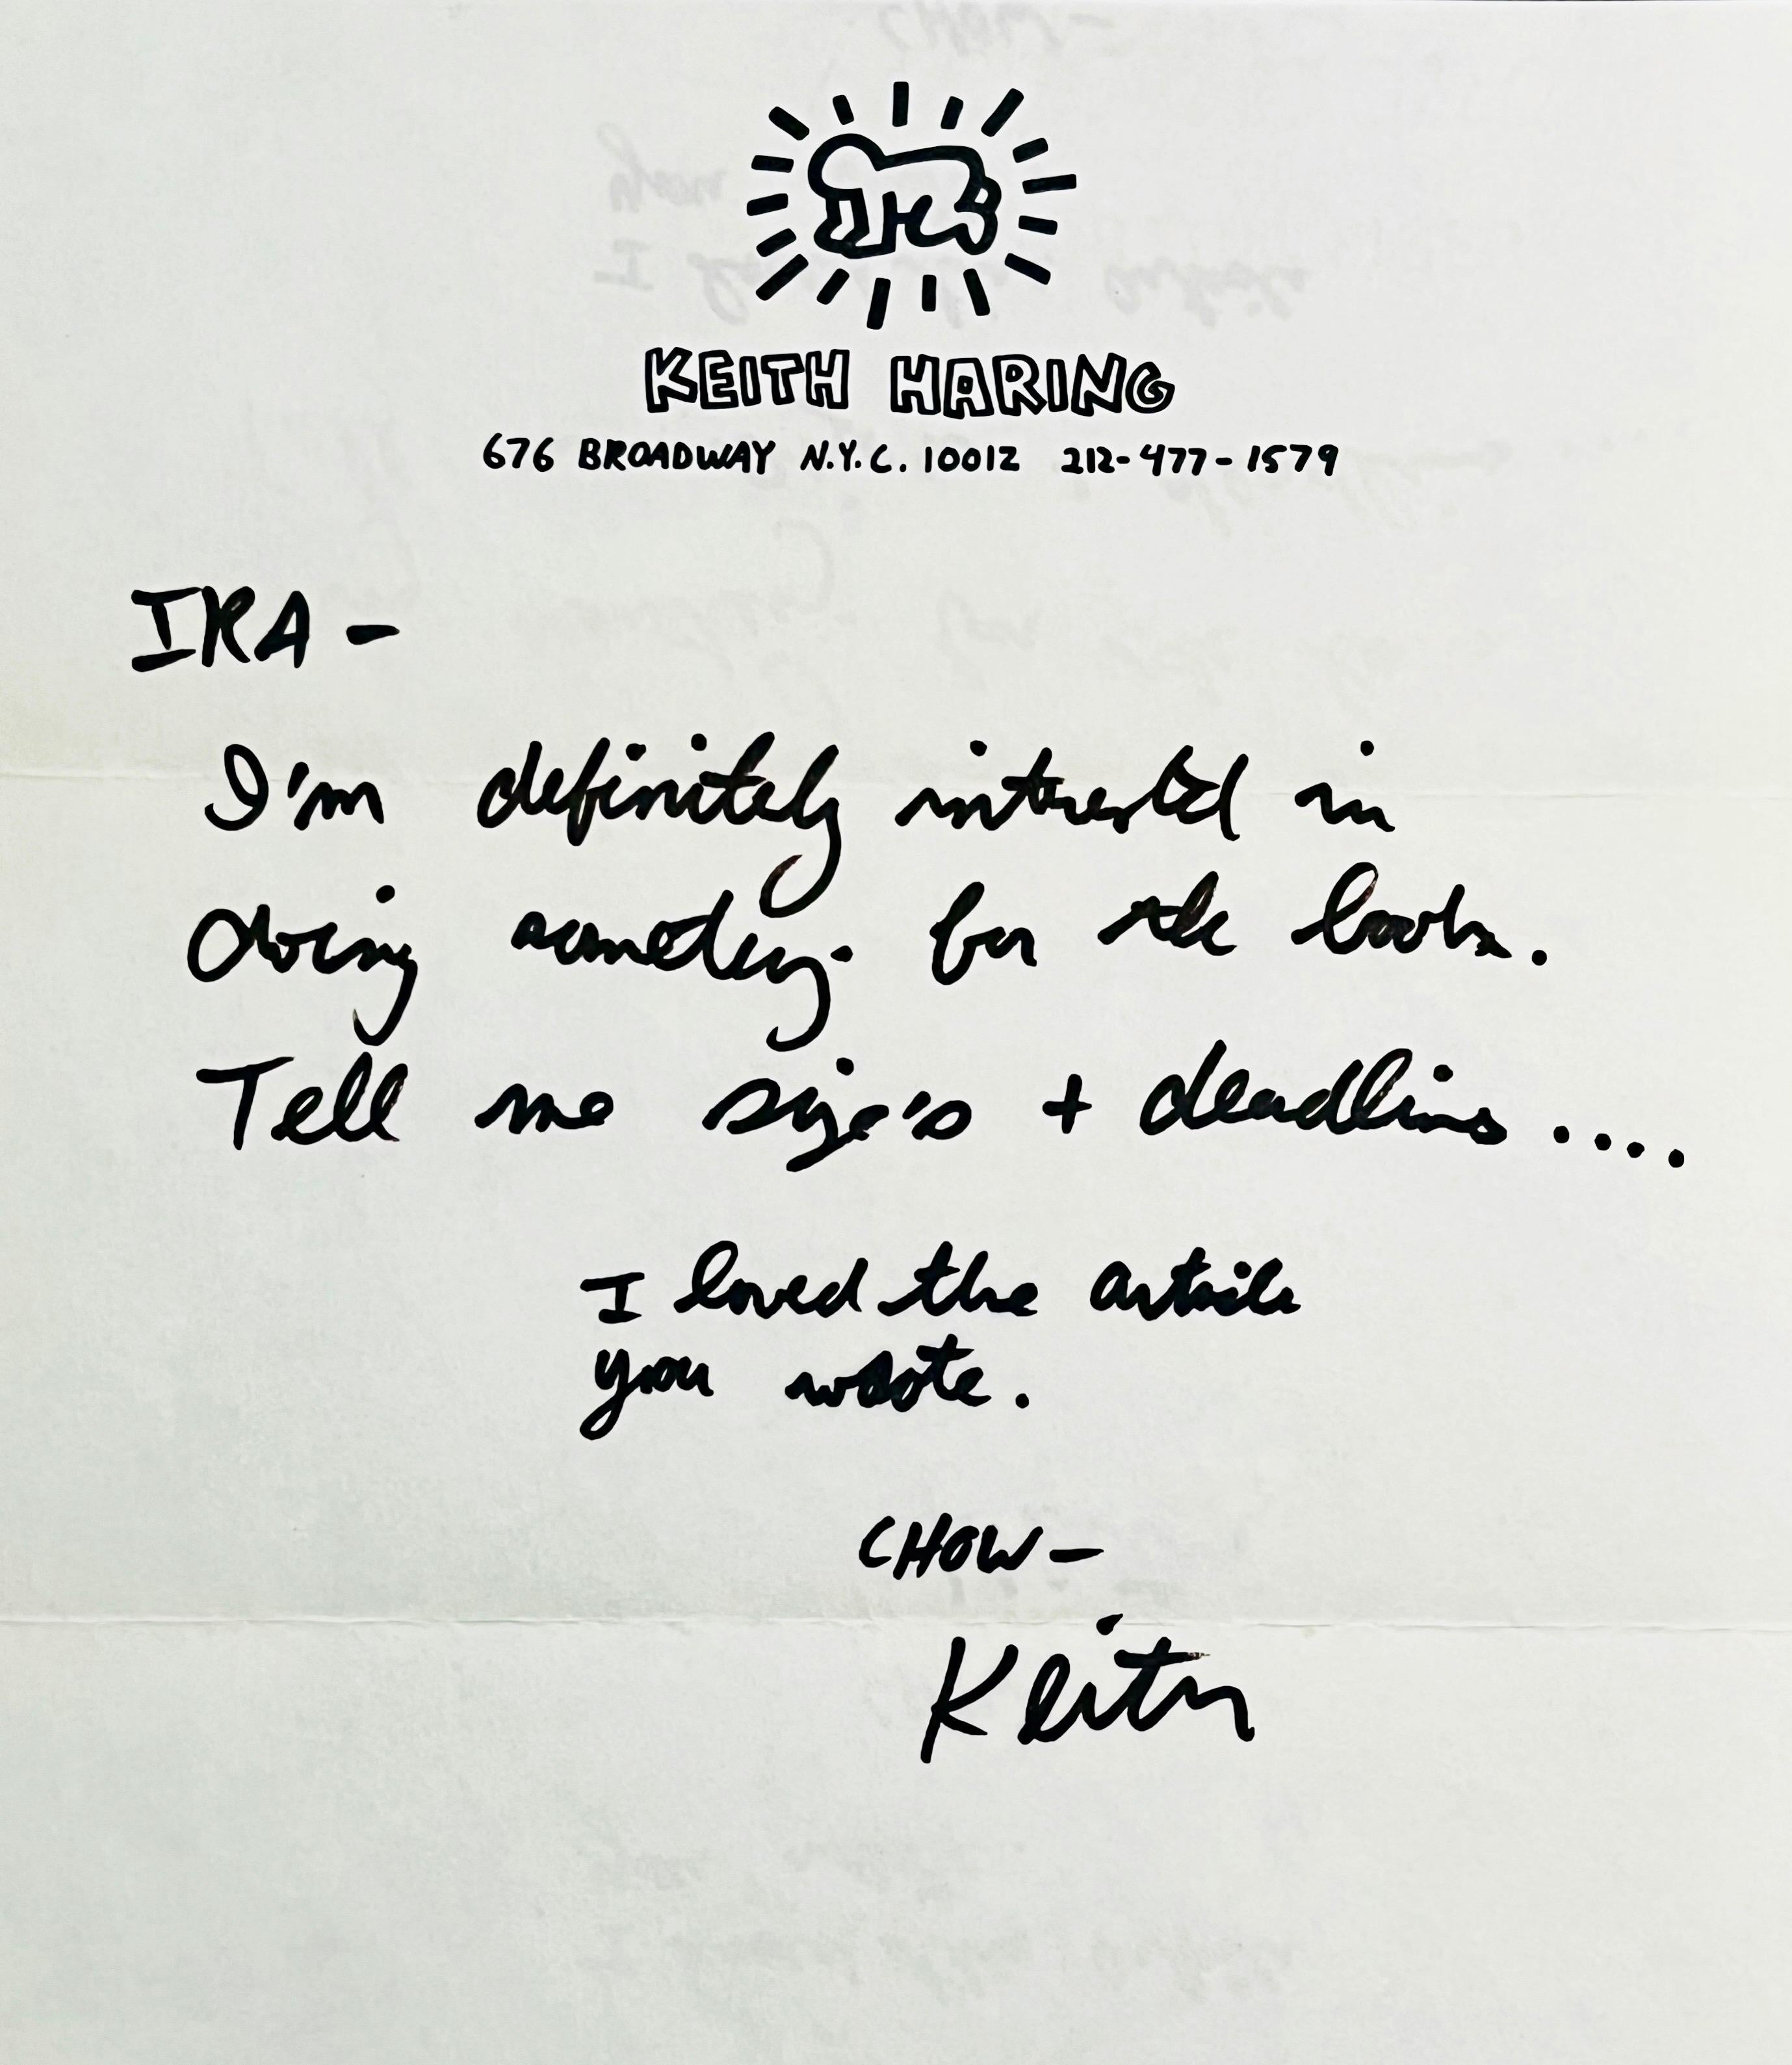 Keith Haring Handwritten letter 1986 (Keith Haring letter)  For Sale 4